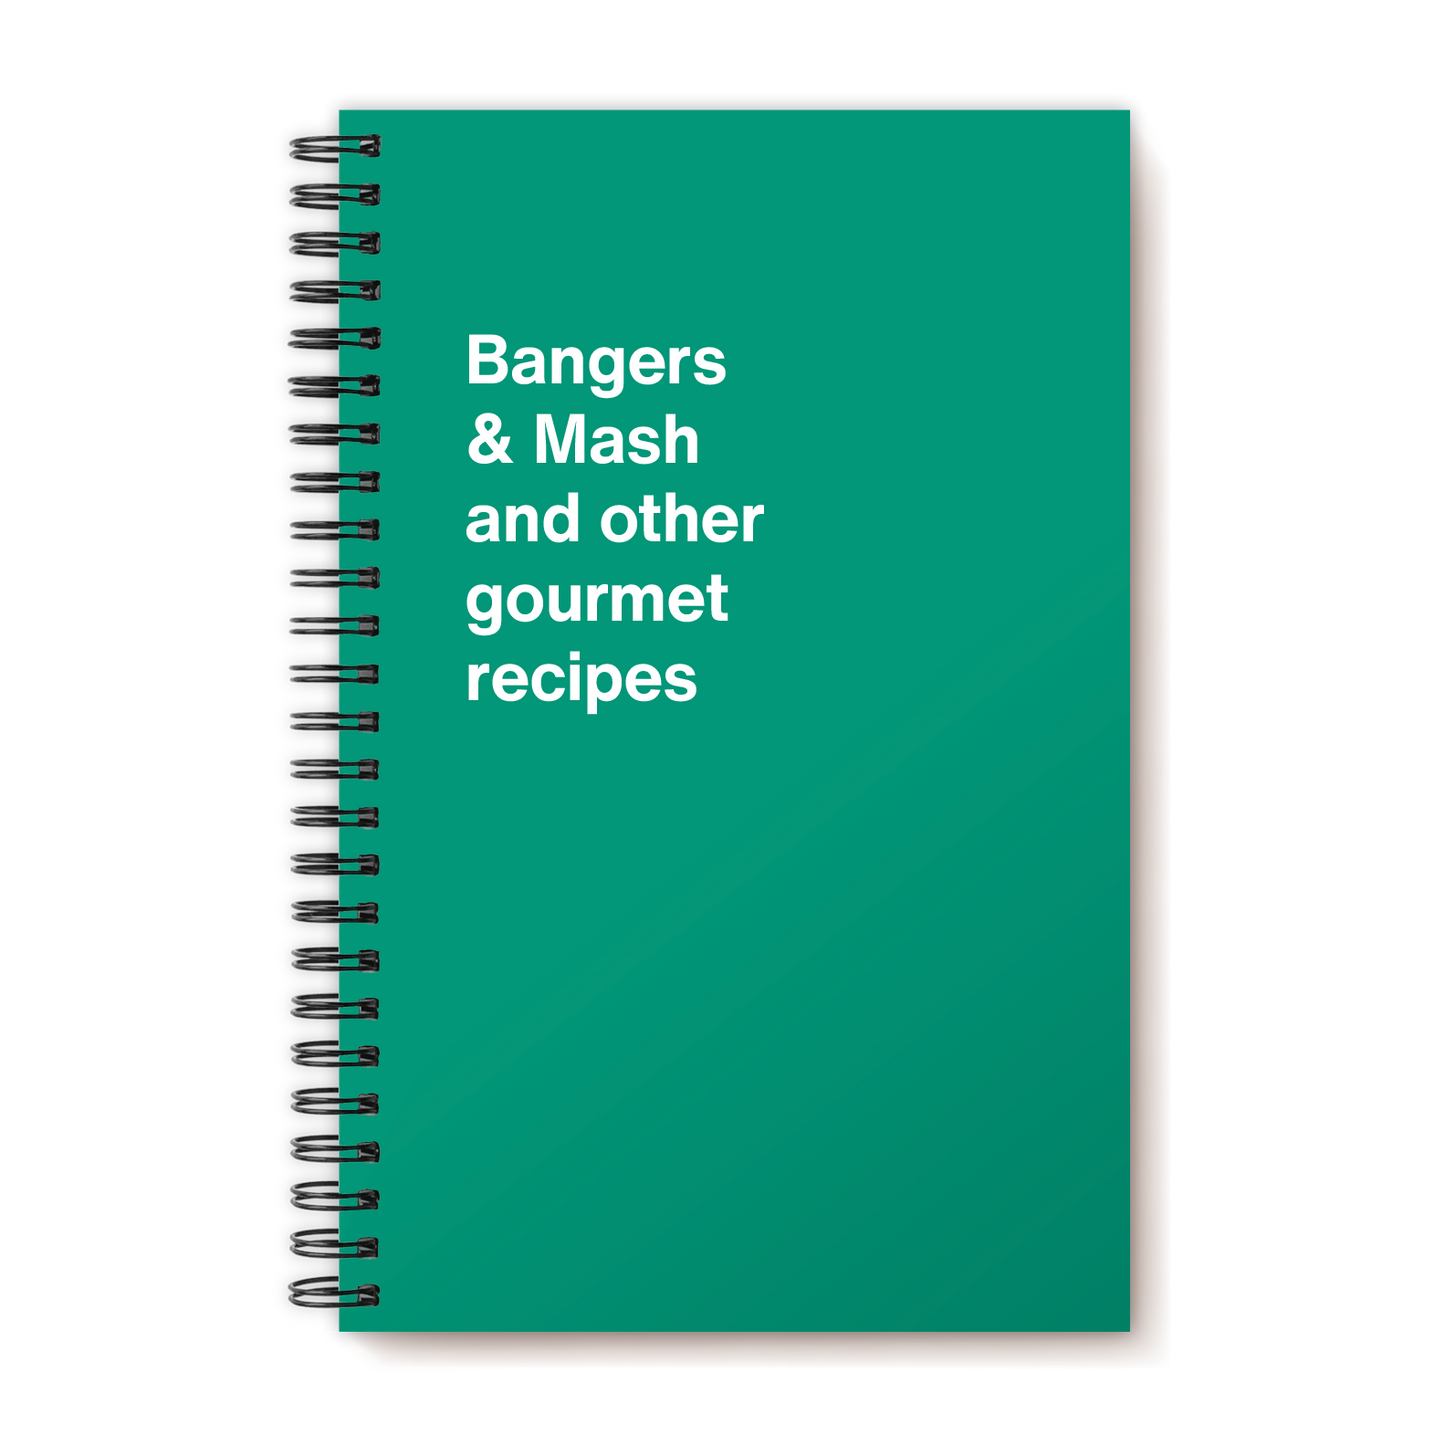 Bangers & Mash and other gourmet recipes | WTF Notebooks